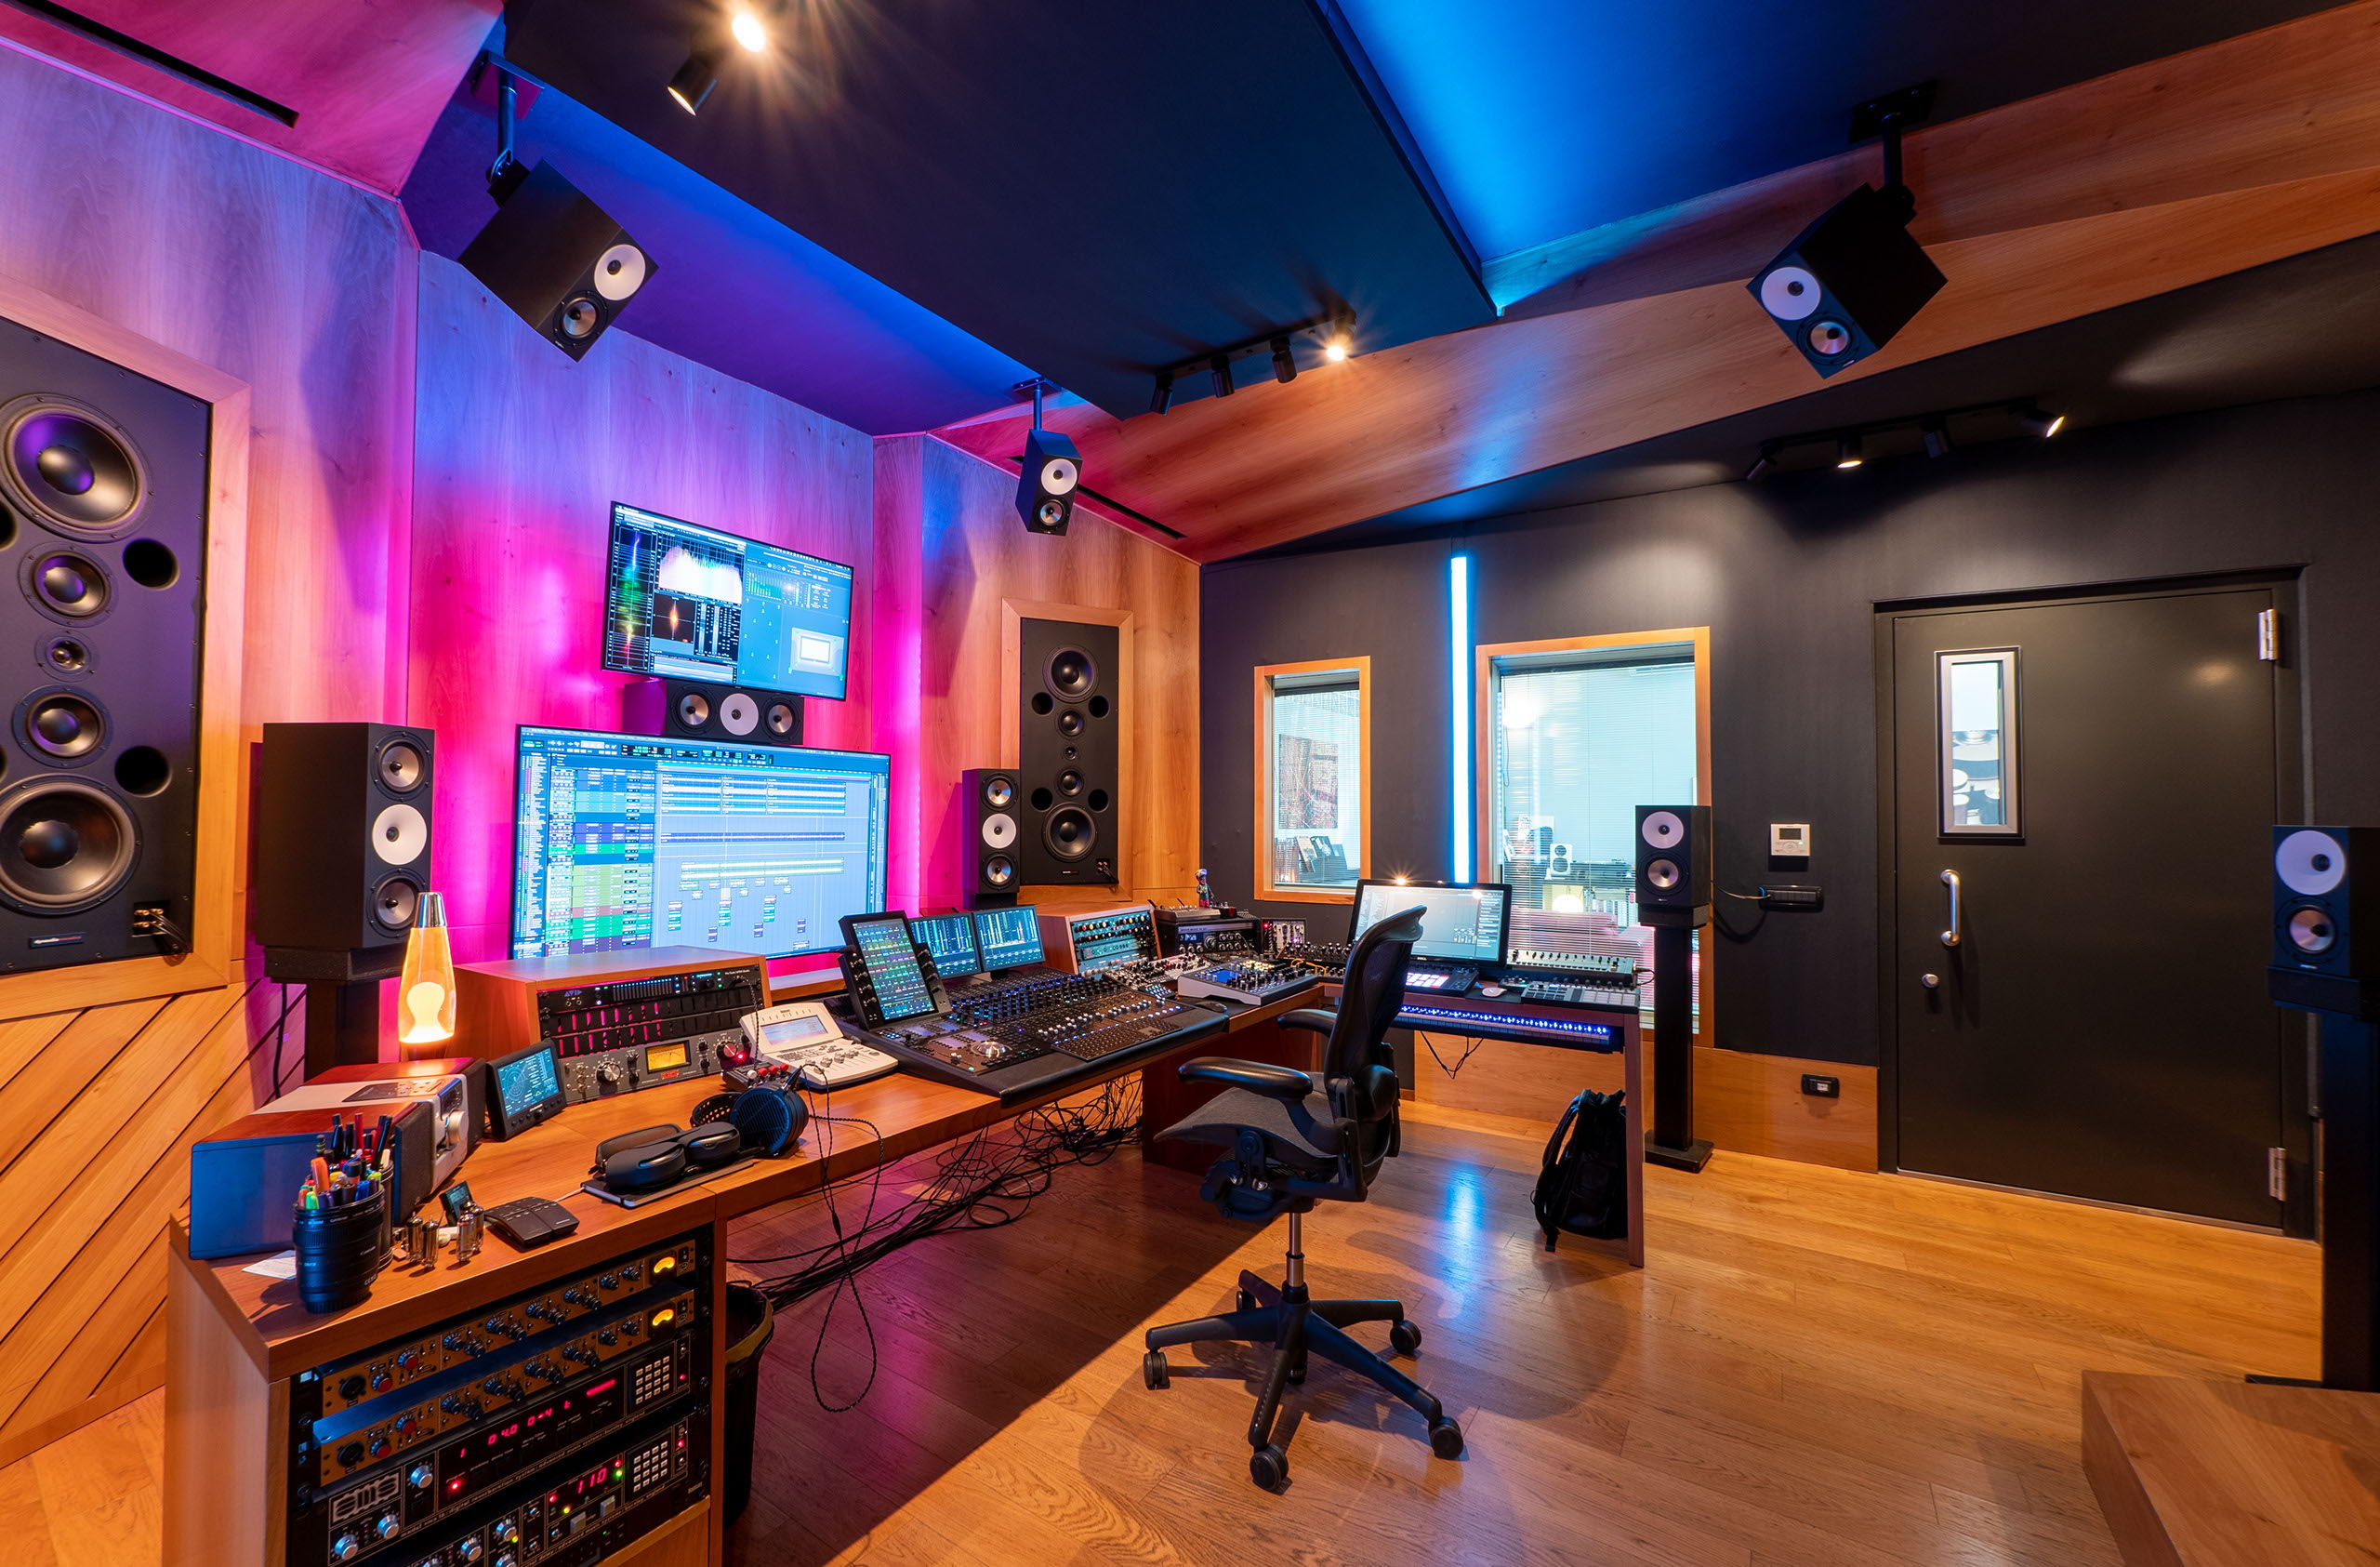 "I'd been using the Amphion One18s for stereo mixes and was always impressed by how well they translated," he said. "When it was time to do the big upgrade for ATMOS, I knew it had to be Amphion because I'd be able to adapt right away and trust what I was hearing."